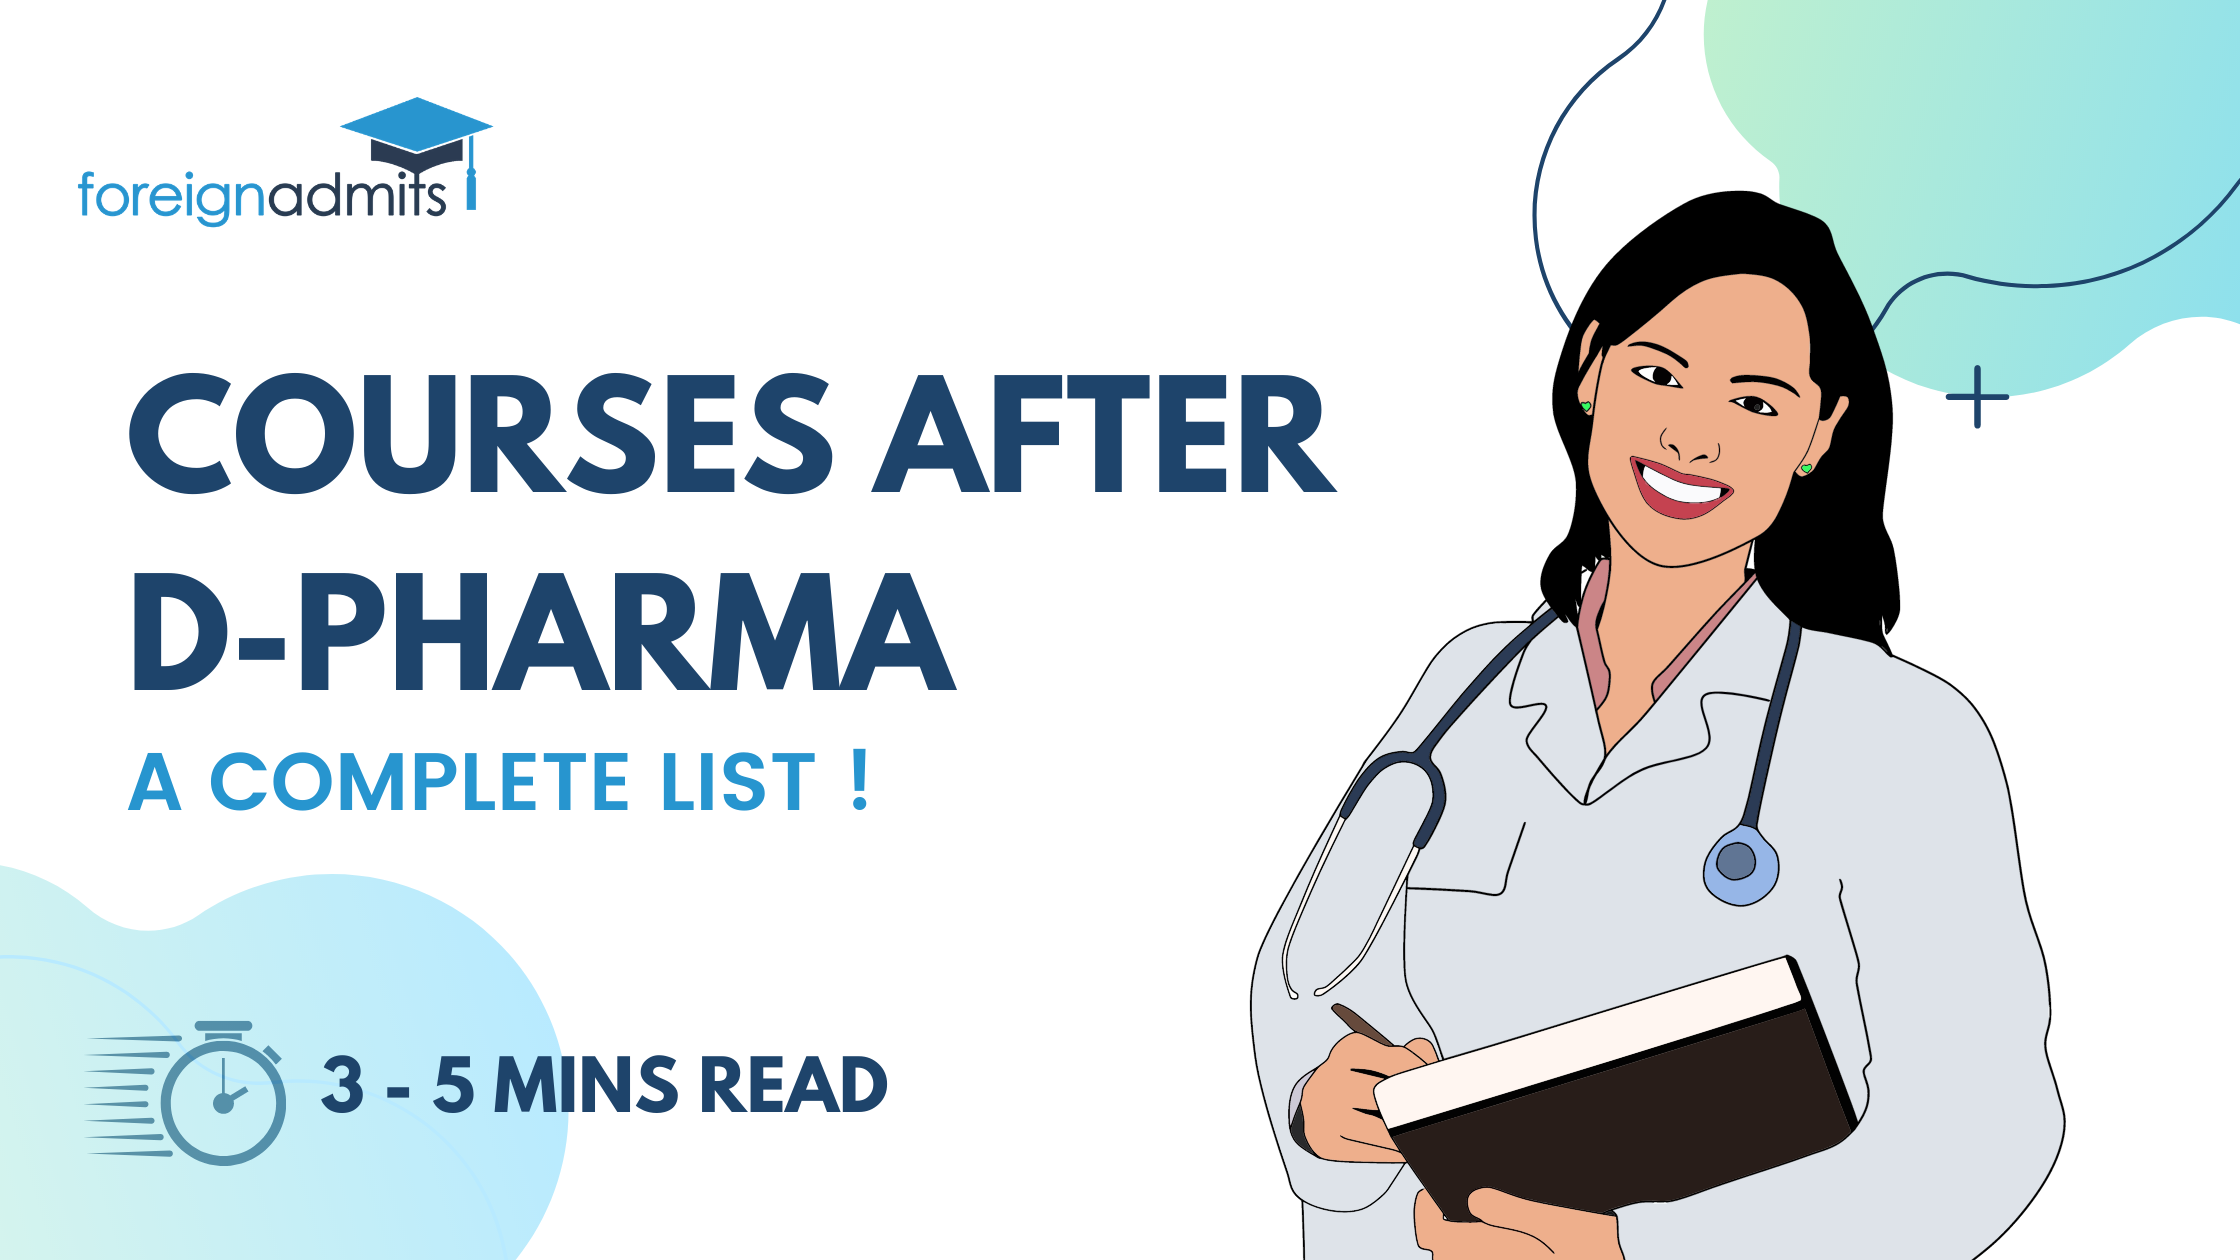 Complete List of Courses After D-pharma